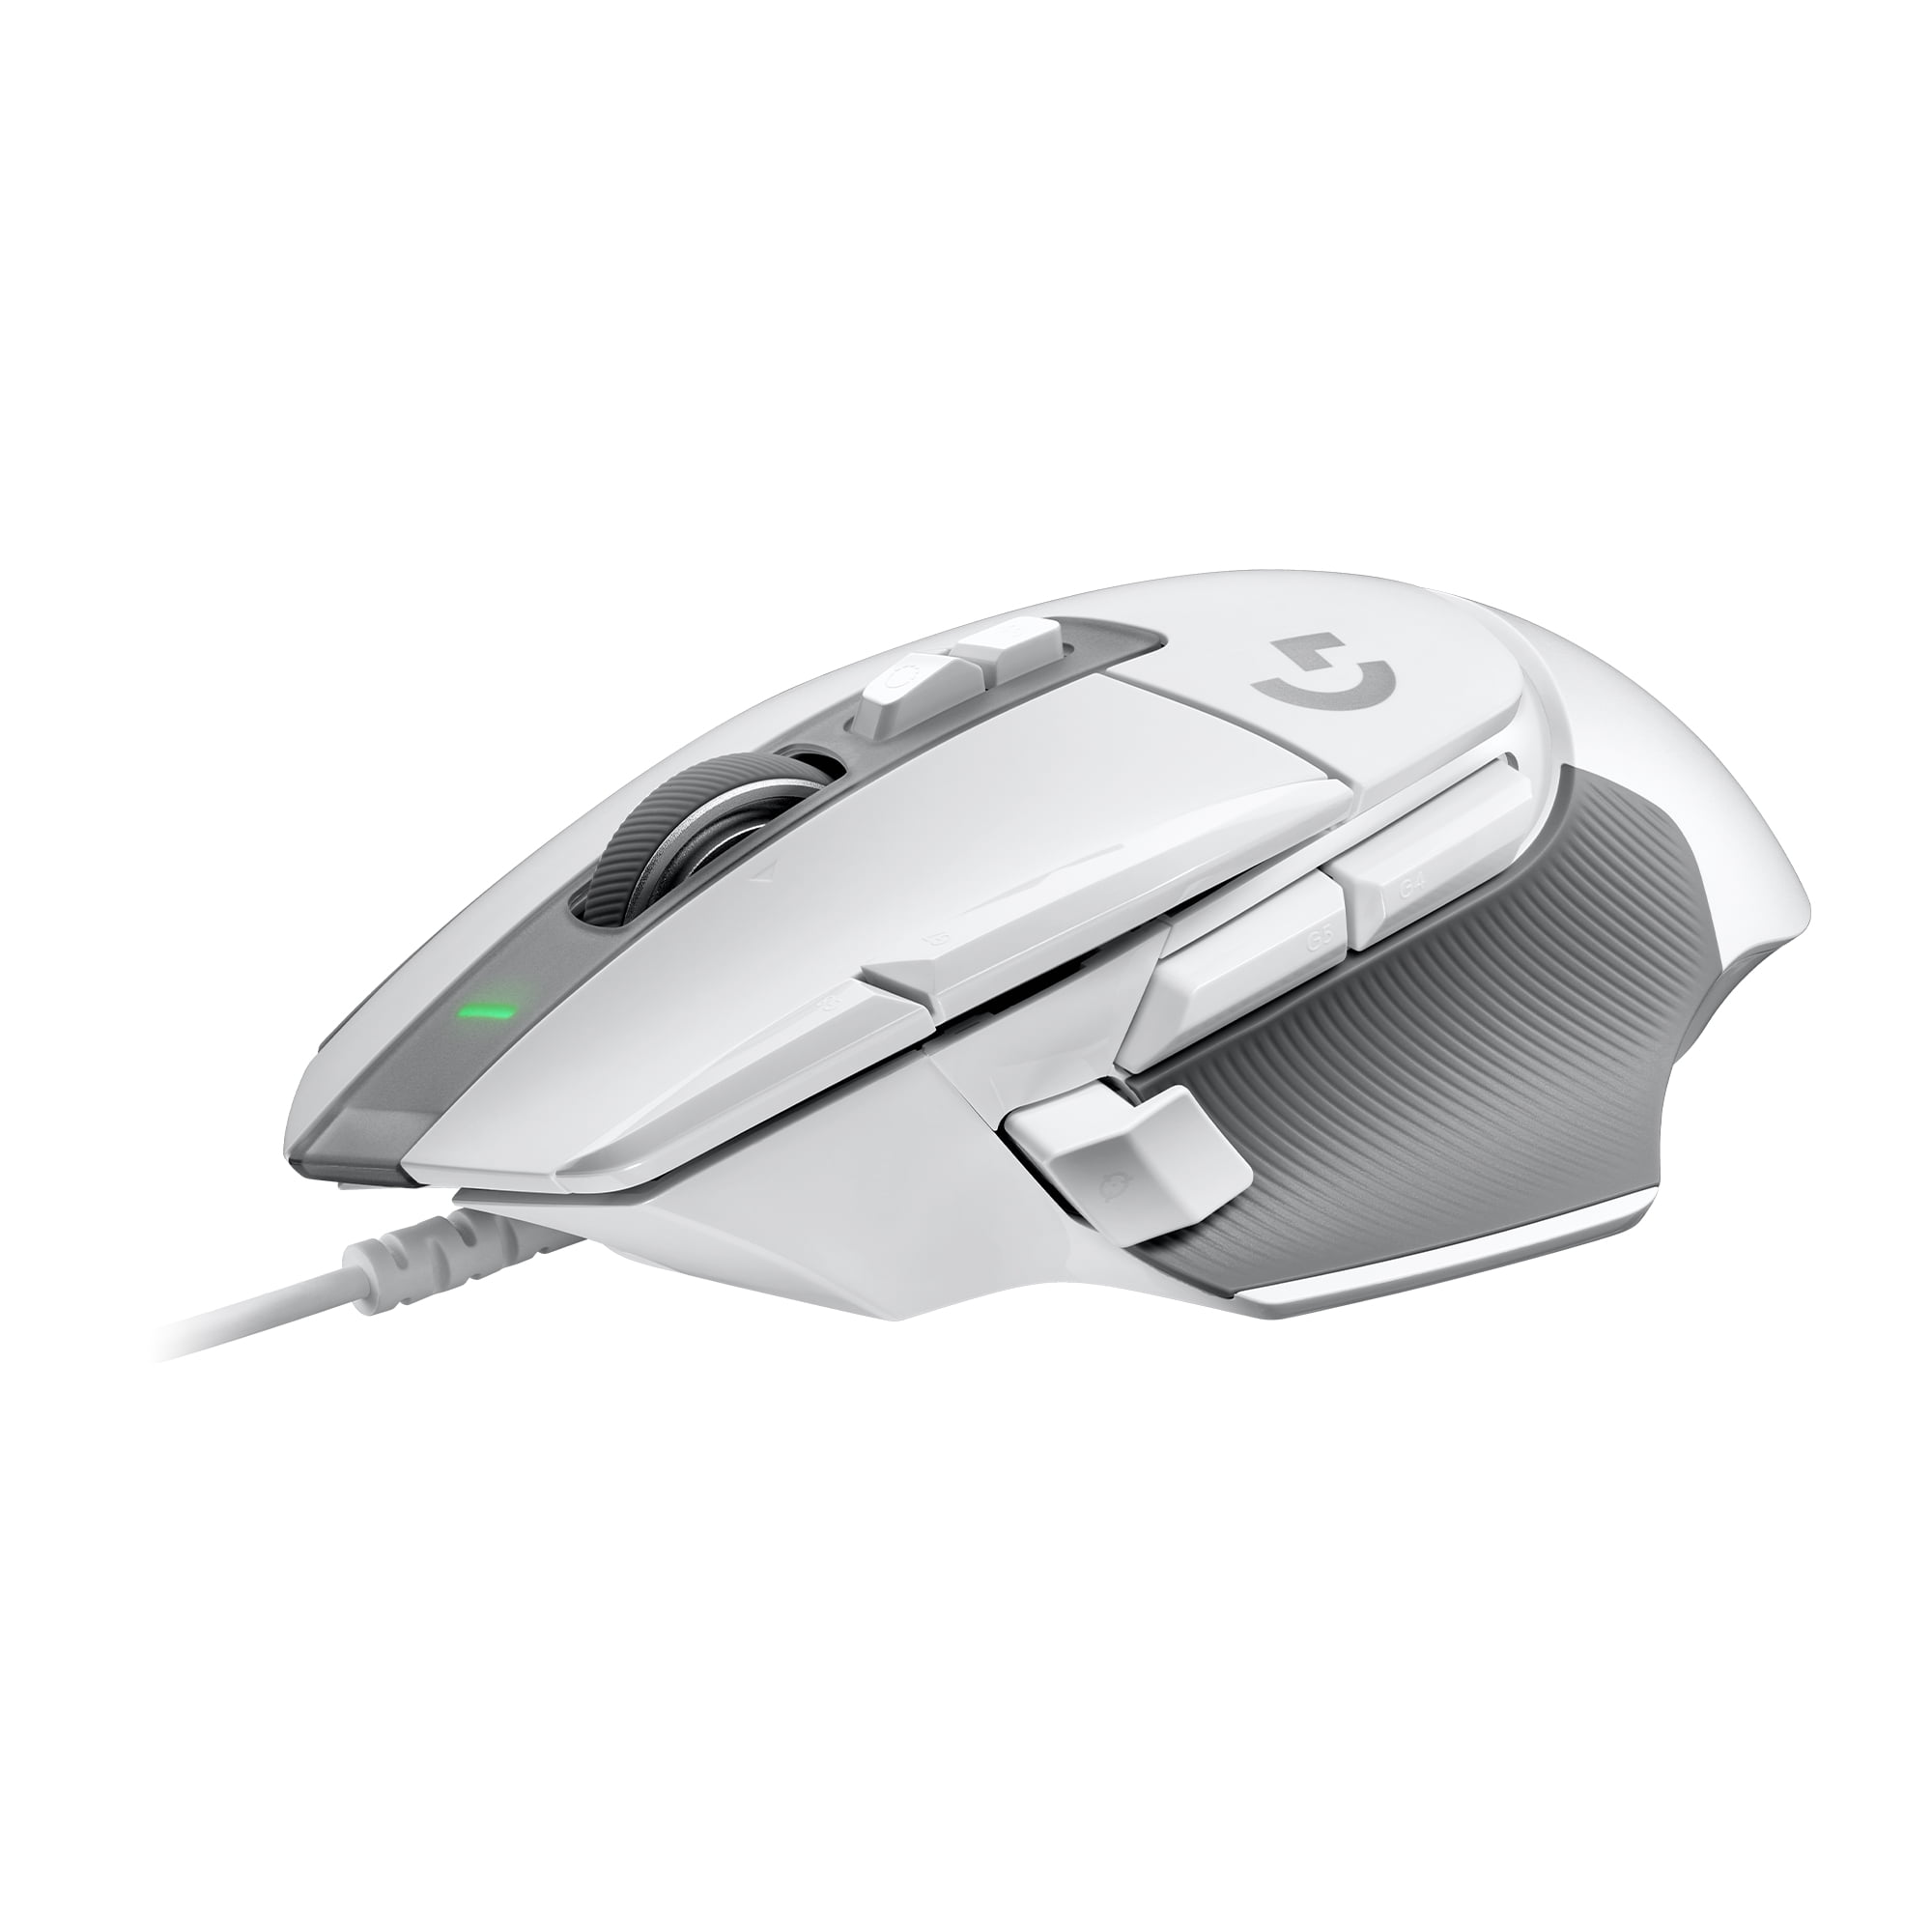 Logitech G502 X Wired Gaming Mouse - LIGHTFORCE hybrid optical-mechanical  primary switches, HERO 25K gaming sensor, compatible with PC -  macOS/Windows 